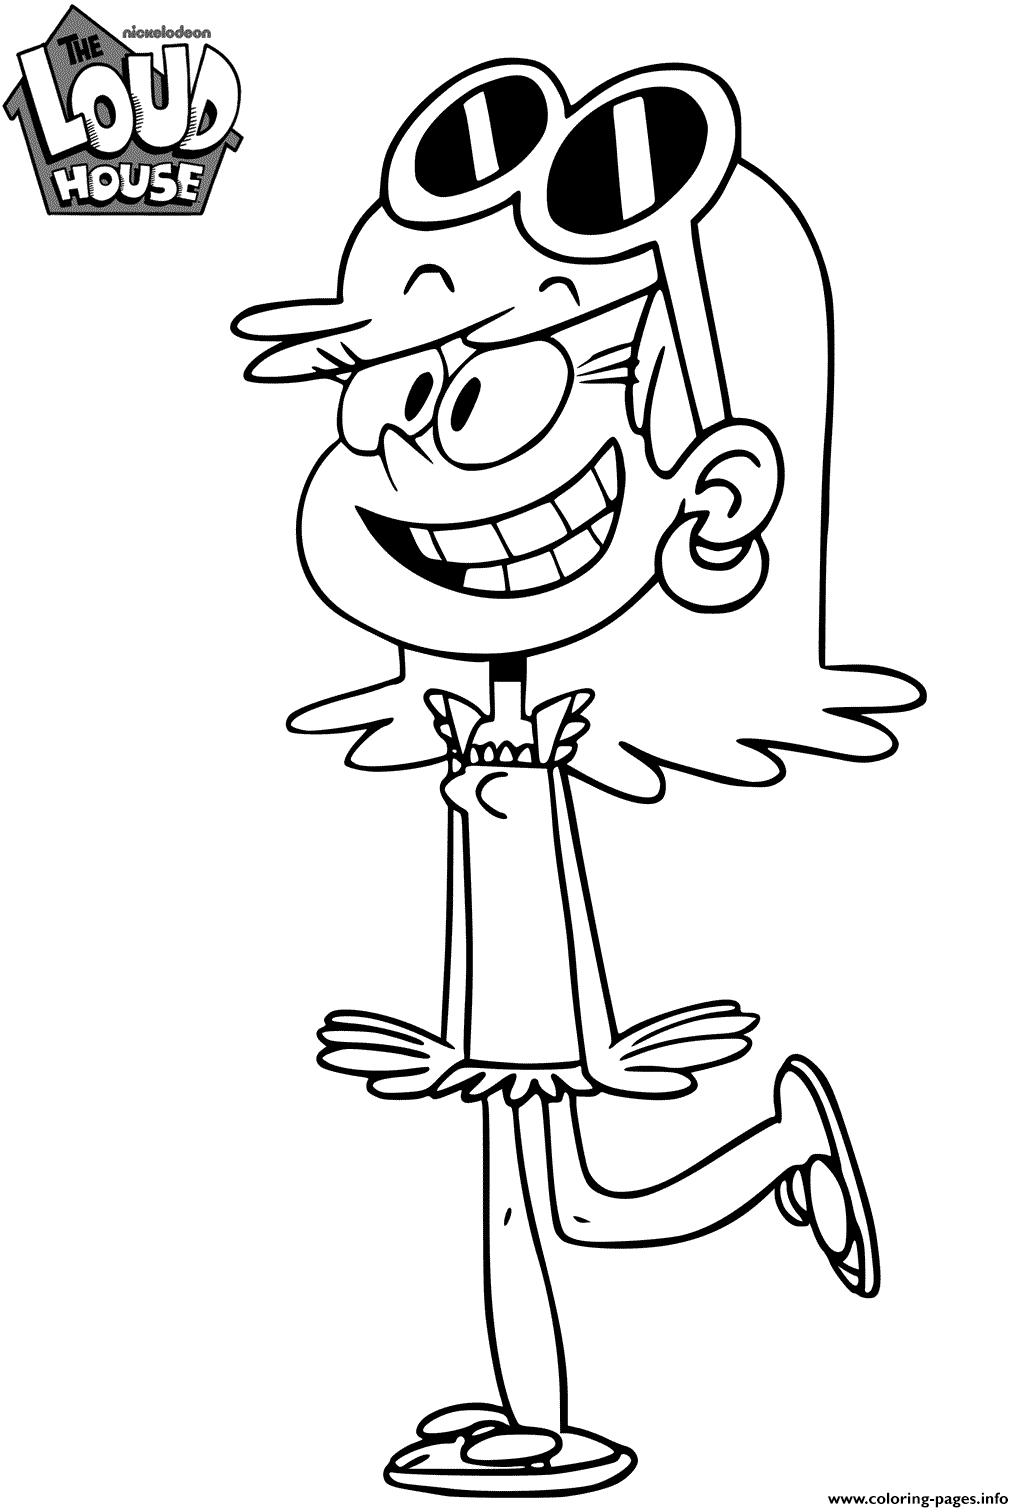 Printable Loud House Coloring Pages - Free Printable ...